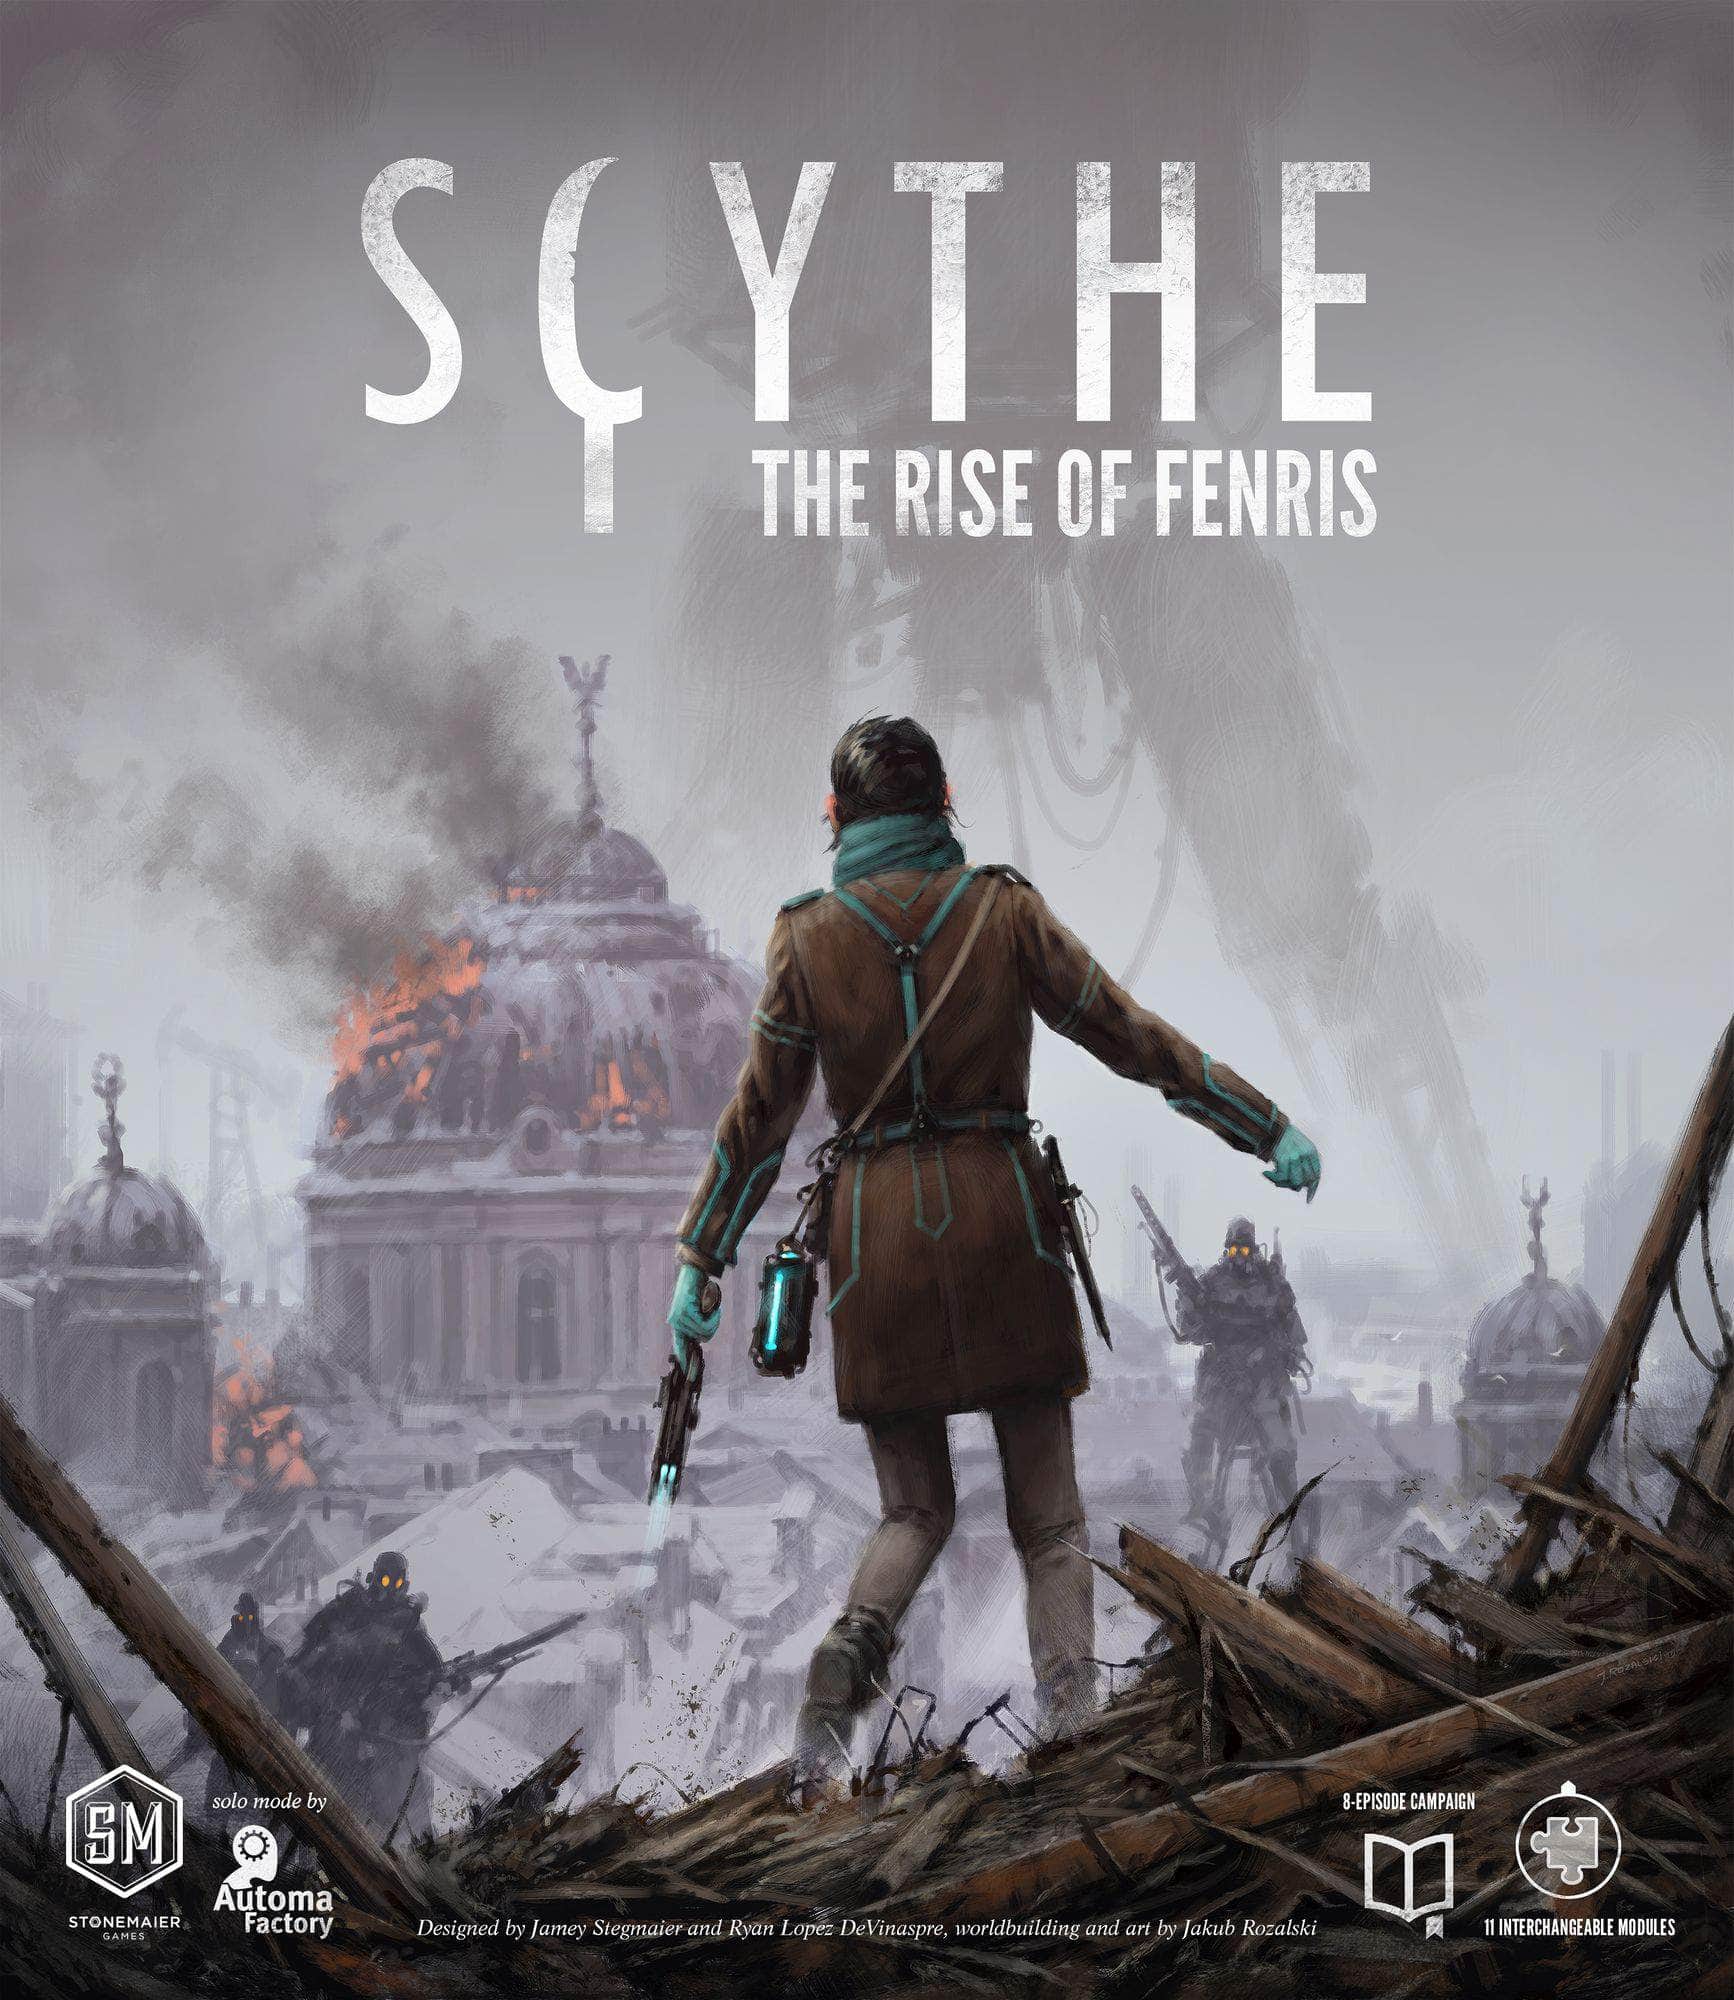 Scythe: The Rise of Fenris Retail Game Expansion Stonemaier Games, Gry Crowd, Delta Vision Publishing, Feuerland Spiele, Gier Ghenos, gry Maldito, Matagot, Phalanx KS800563A